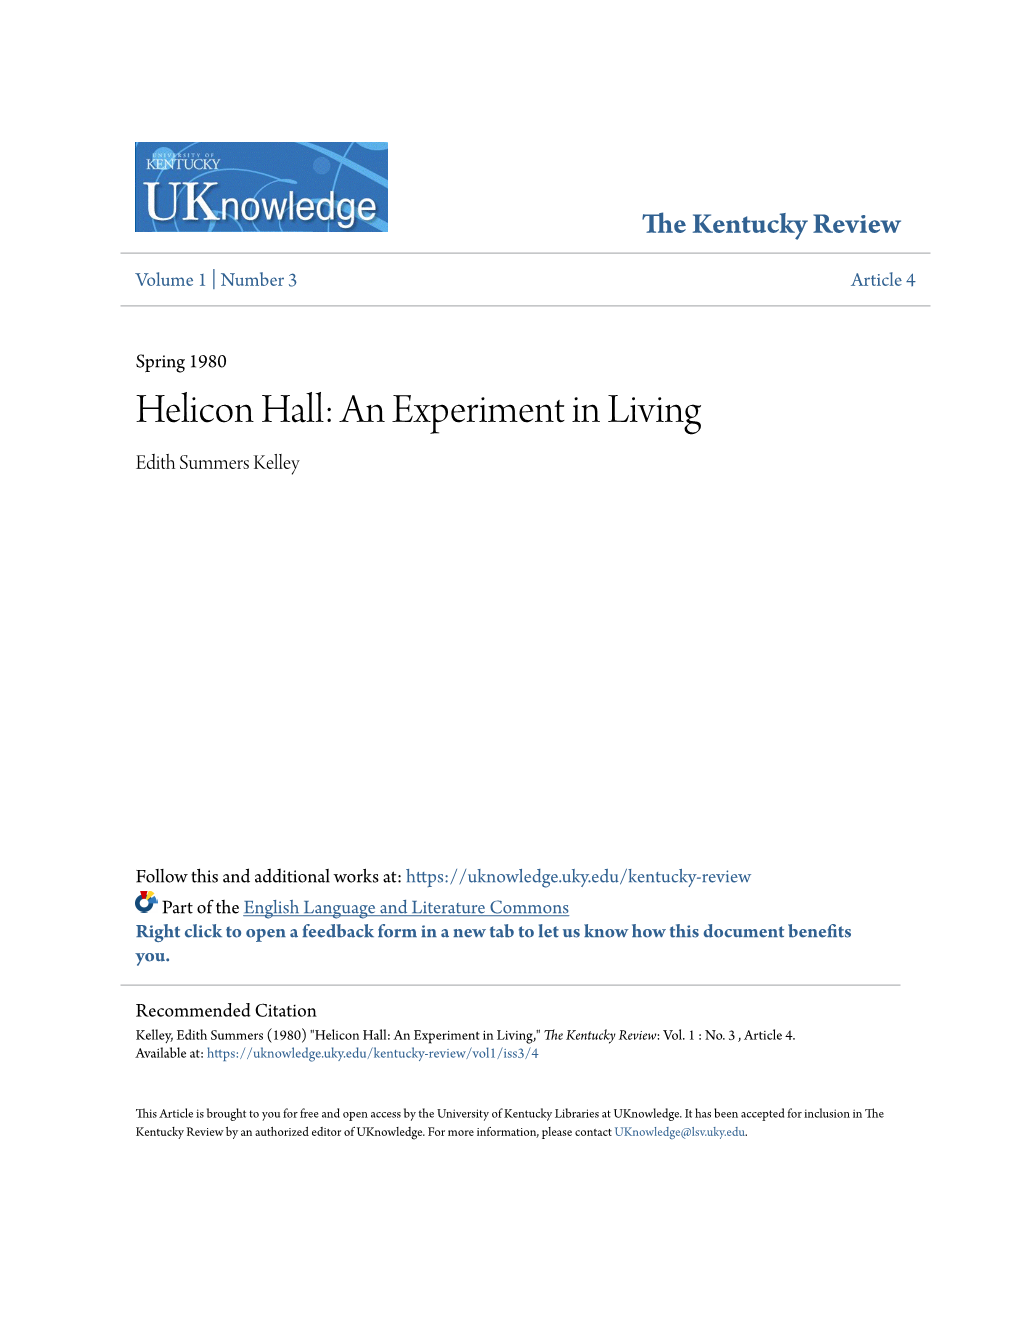 Helicon Hall: an Experiment in Living Edith Summers Kelley